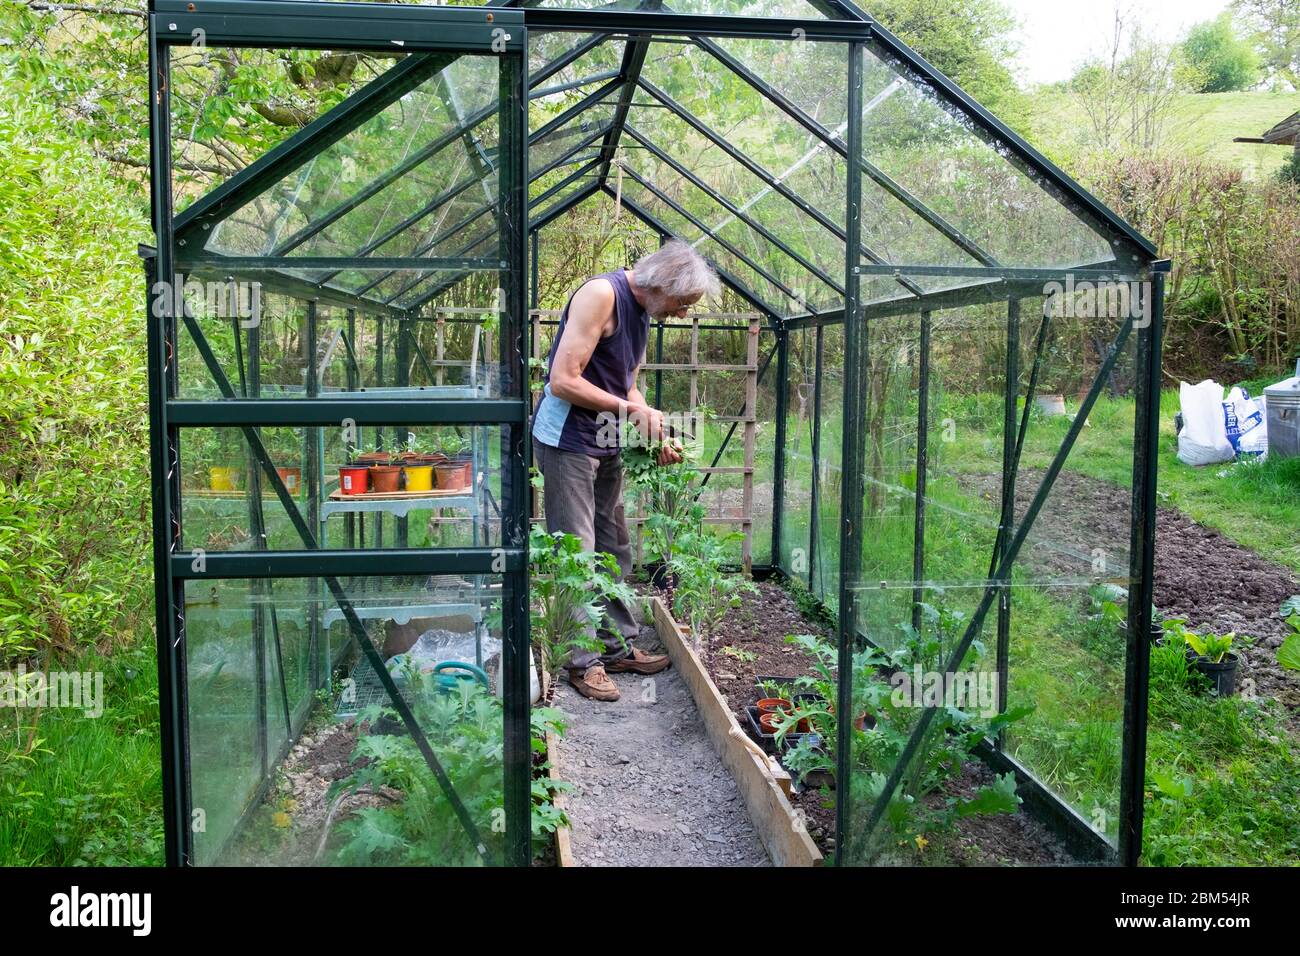 Exterior view of greenhouse and older man standing working inside cutting Russian kale leaves in April spring Wales UK  KATHY DEWITT Stock Photo